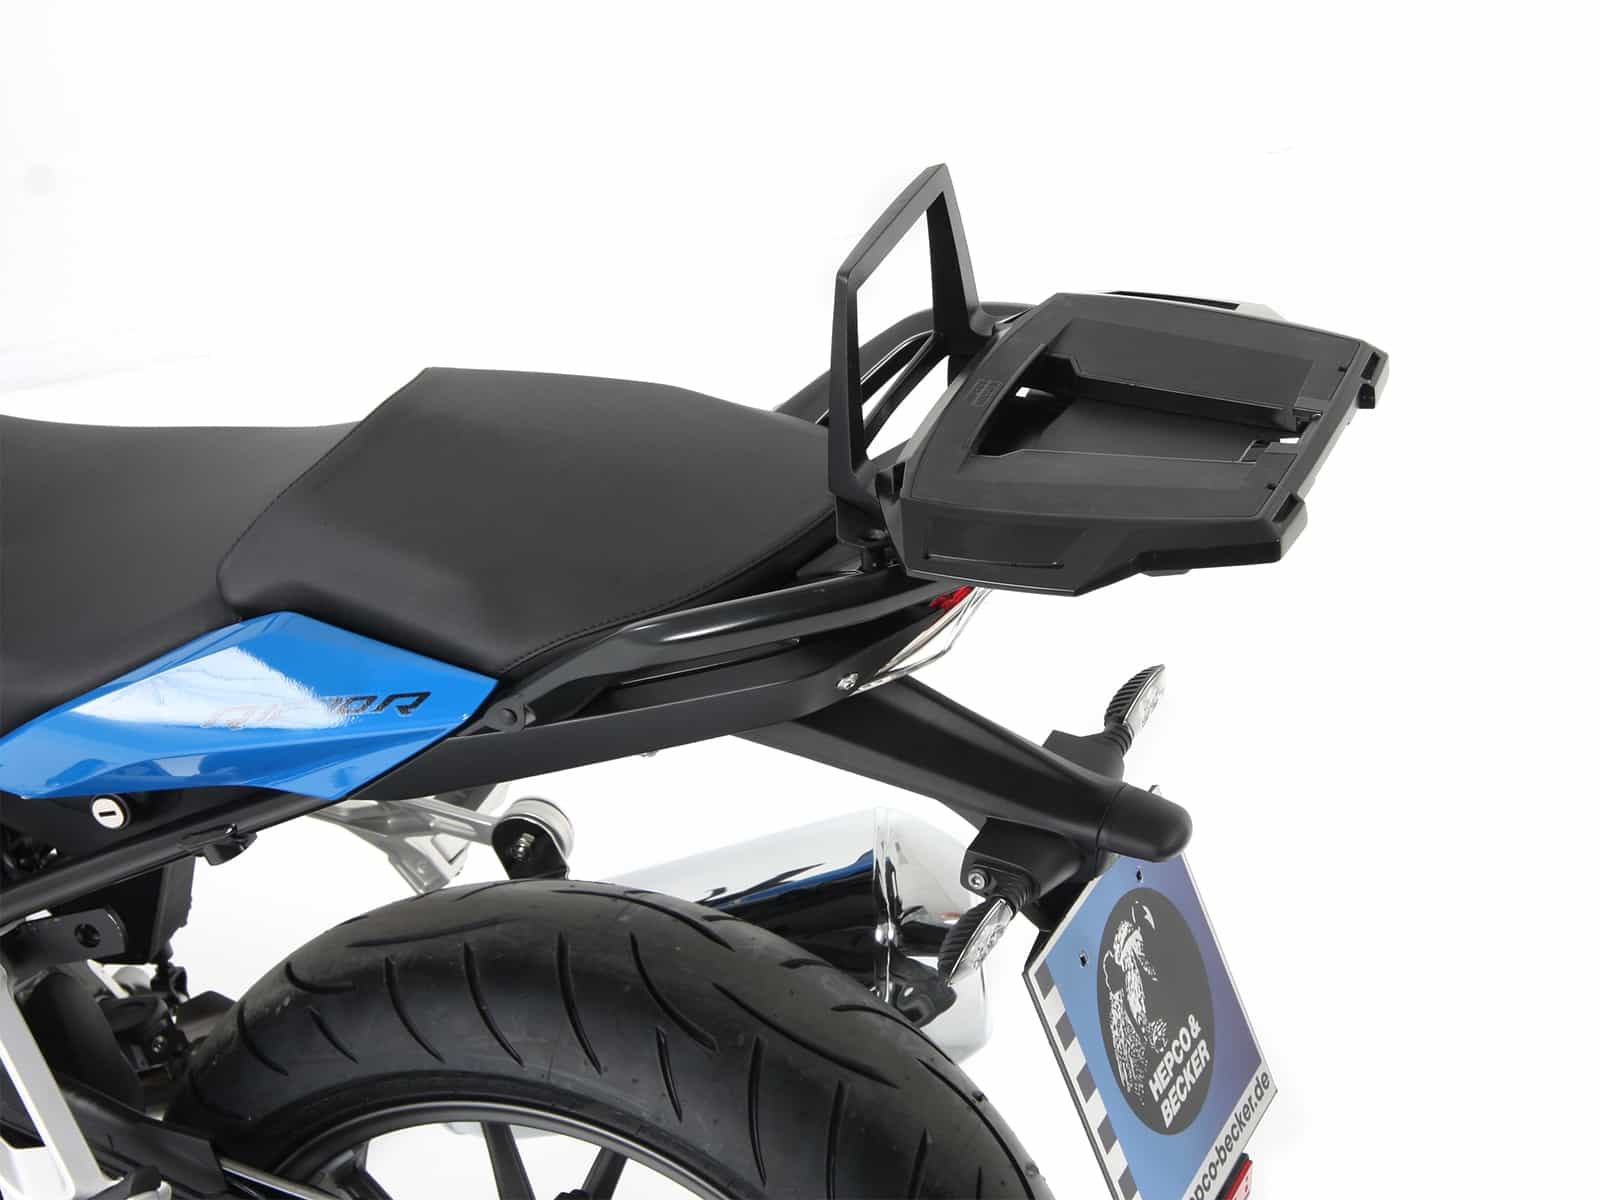 Alurack top case carrier black for combination with original rear rack for BMW R 1250 RS (2019-)